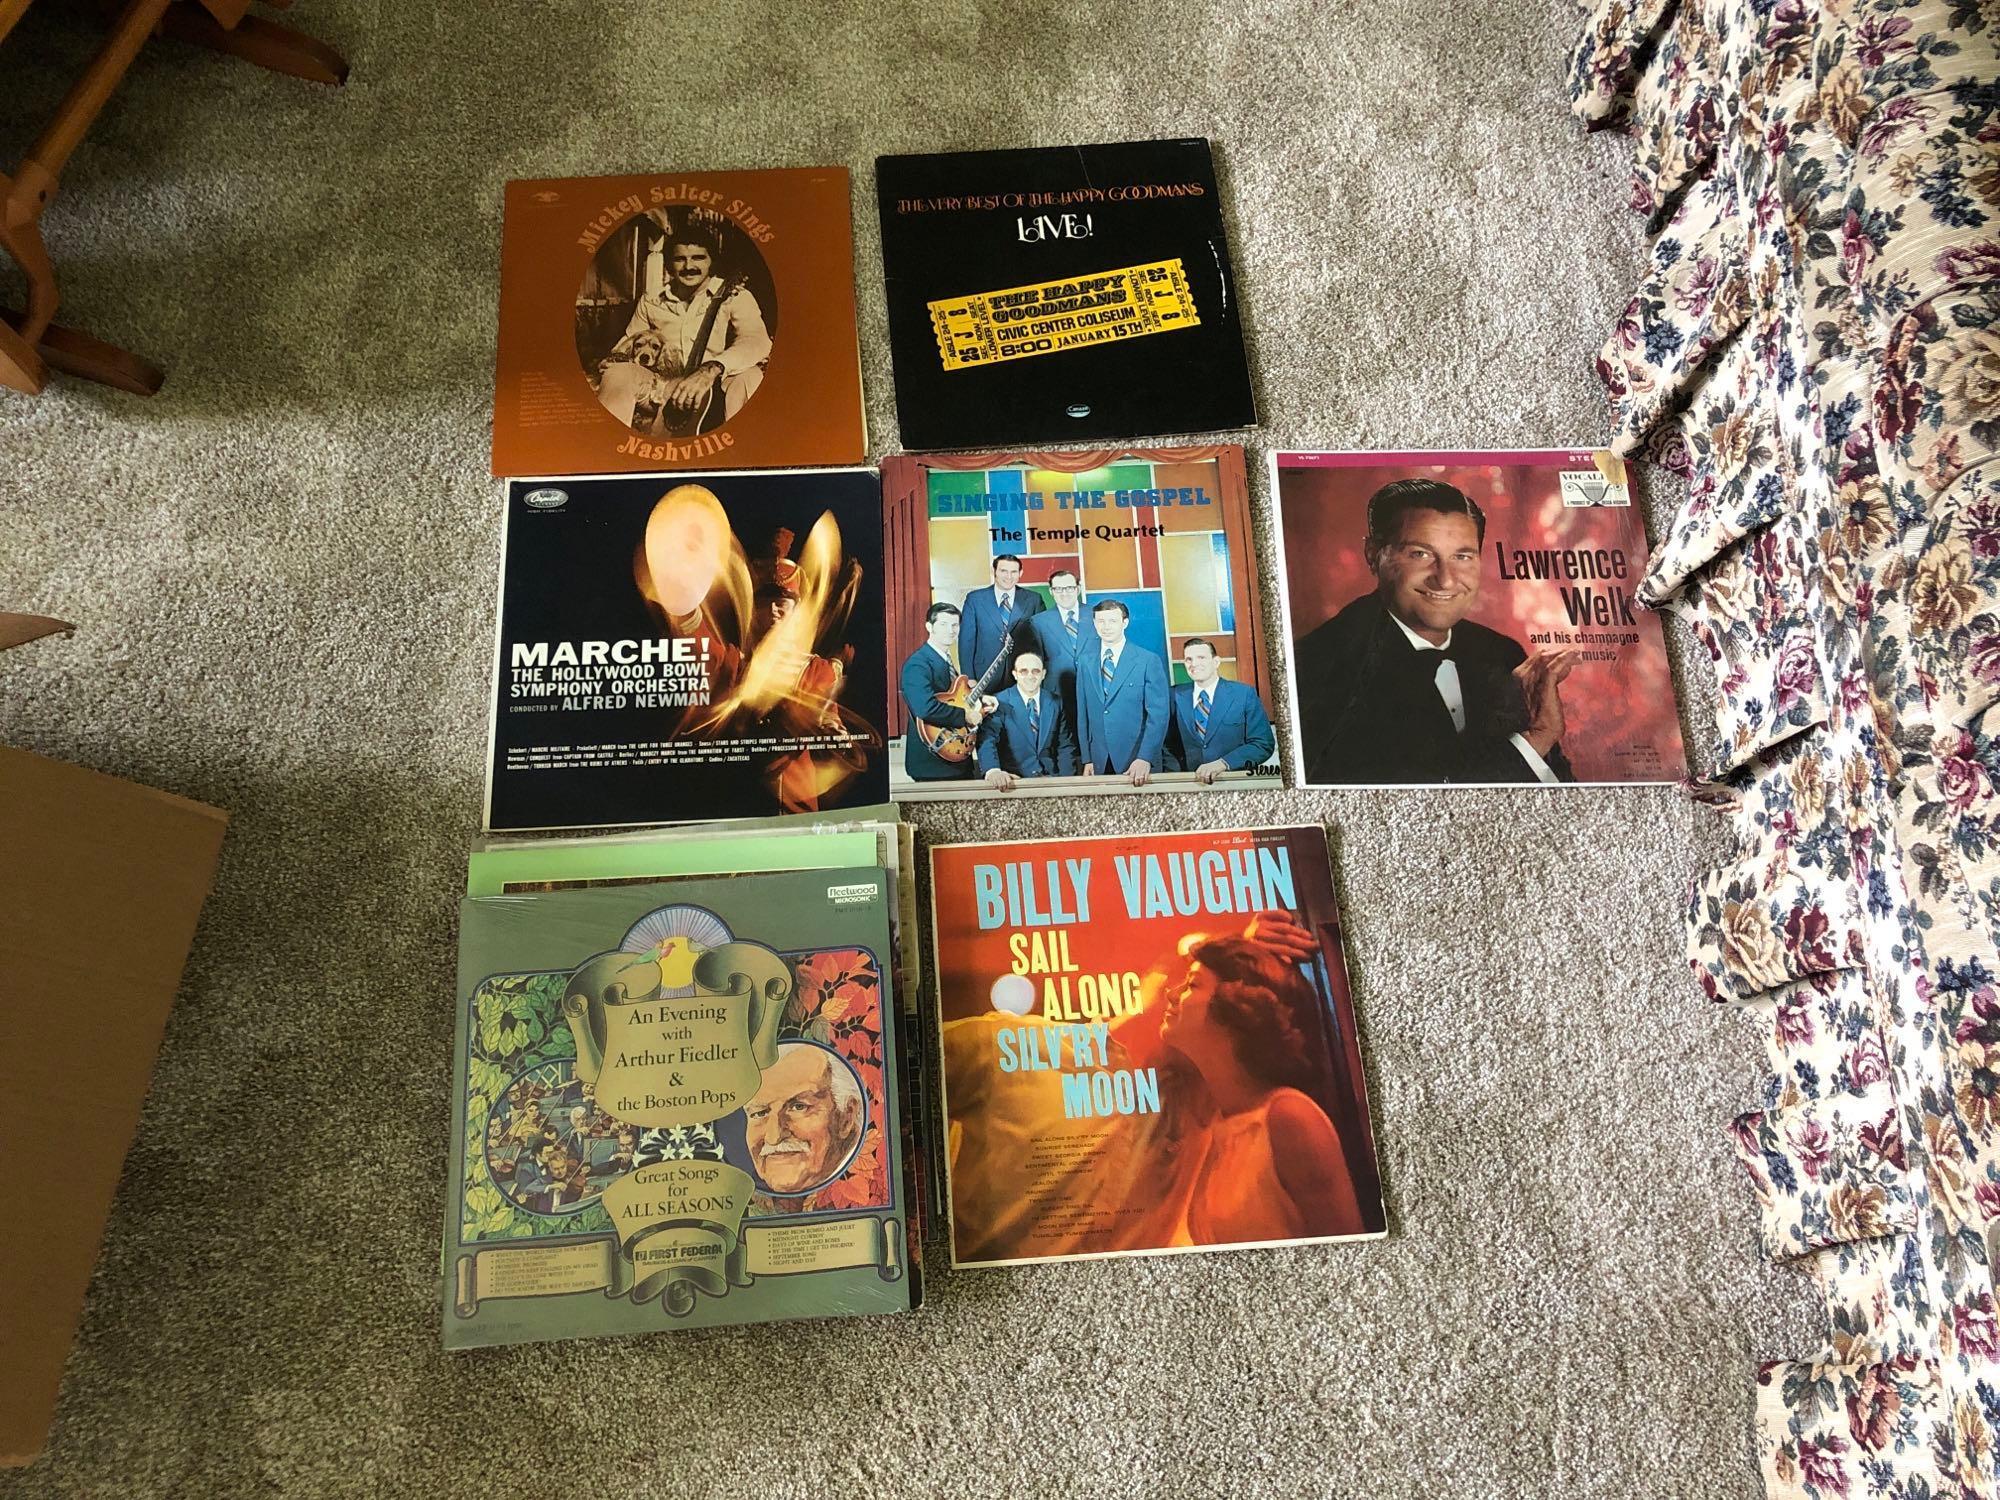 Record collection